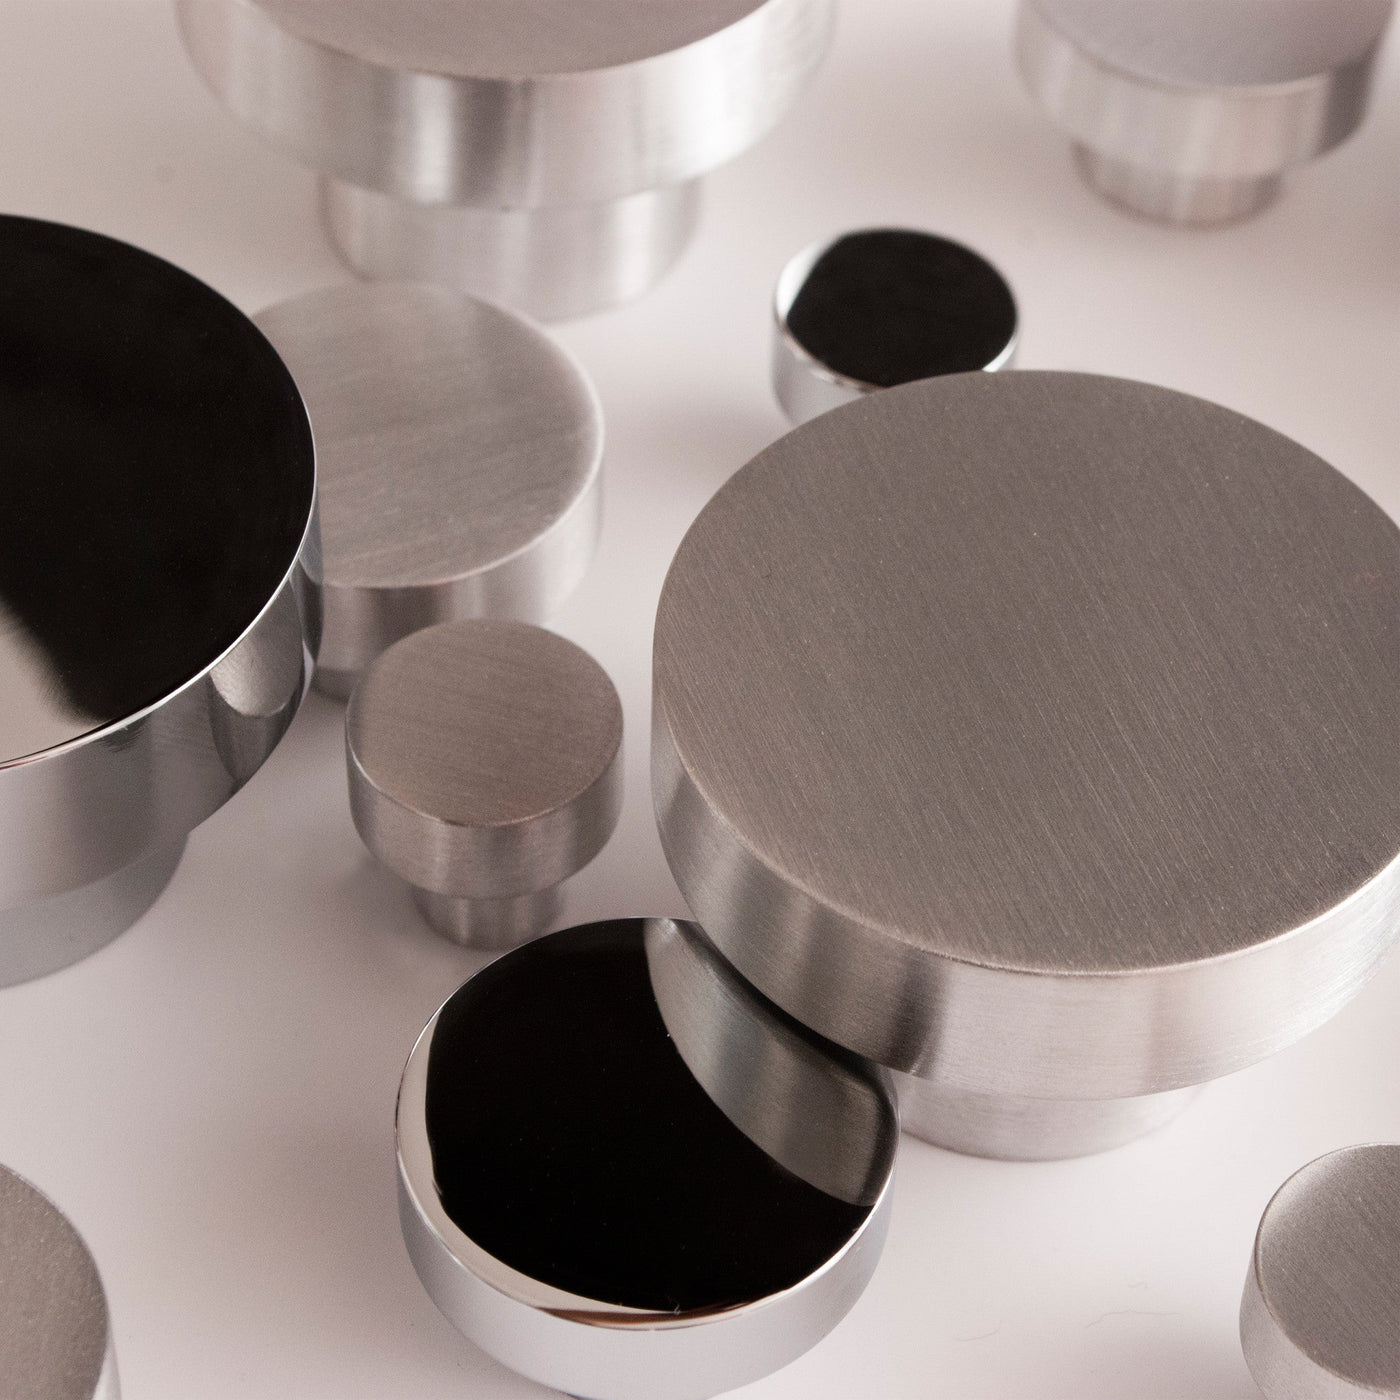 A close up of several Baccman Berglund Dot Knobs on a white surface.